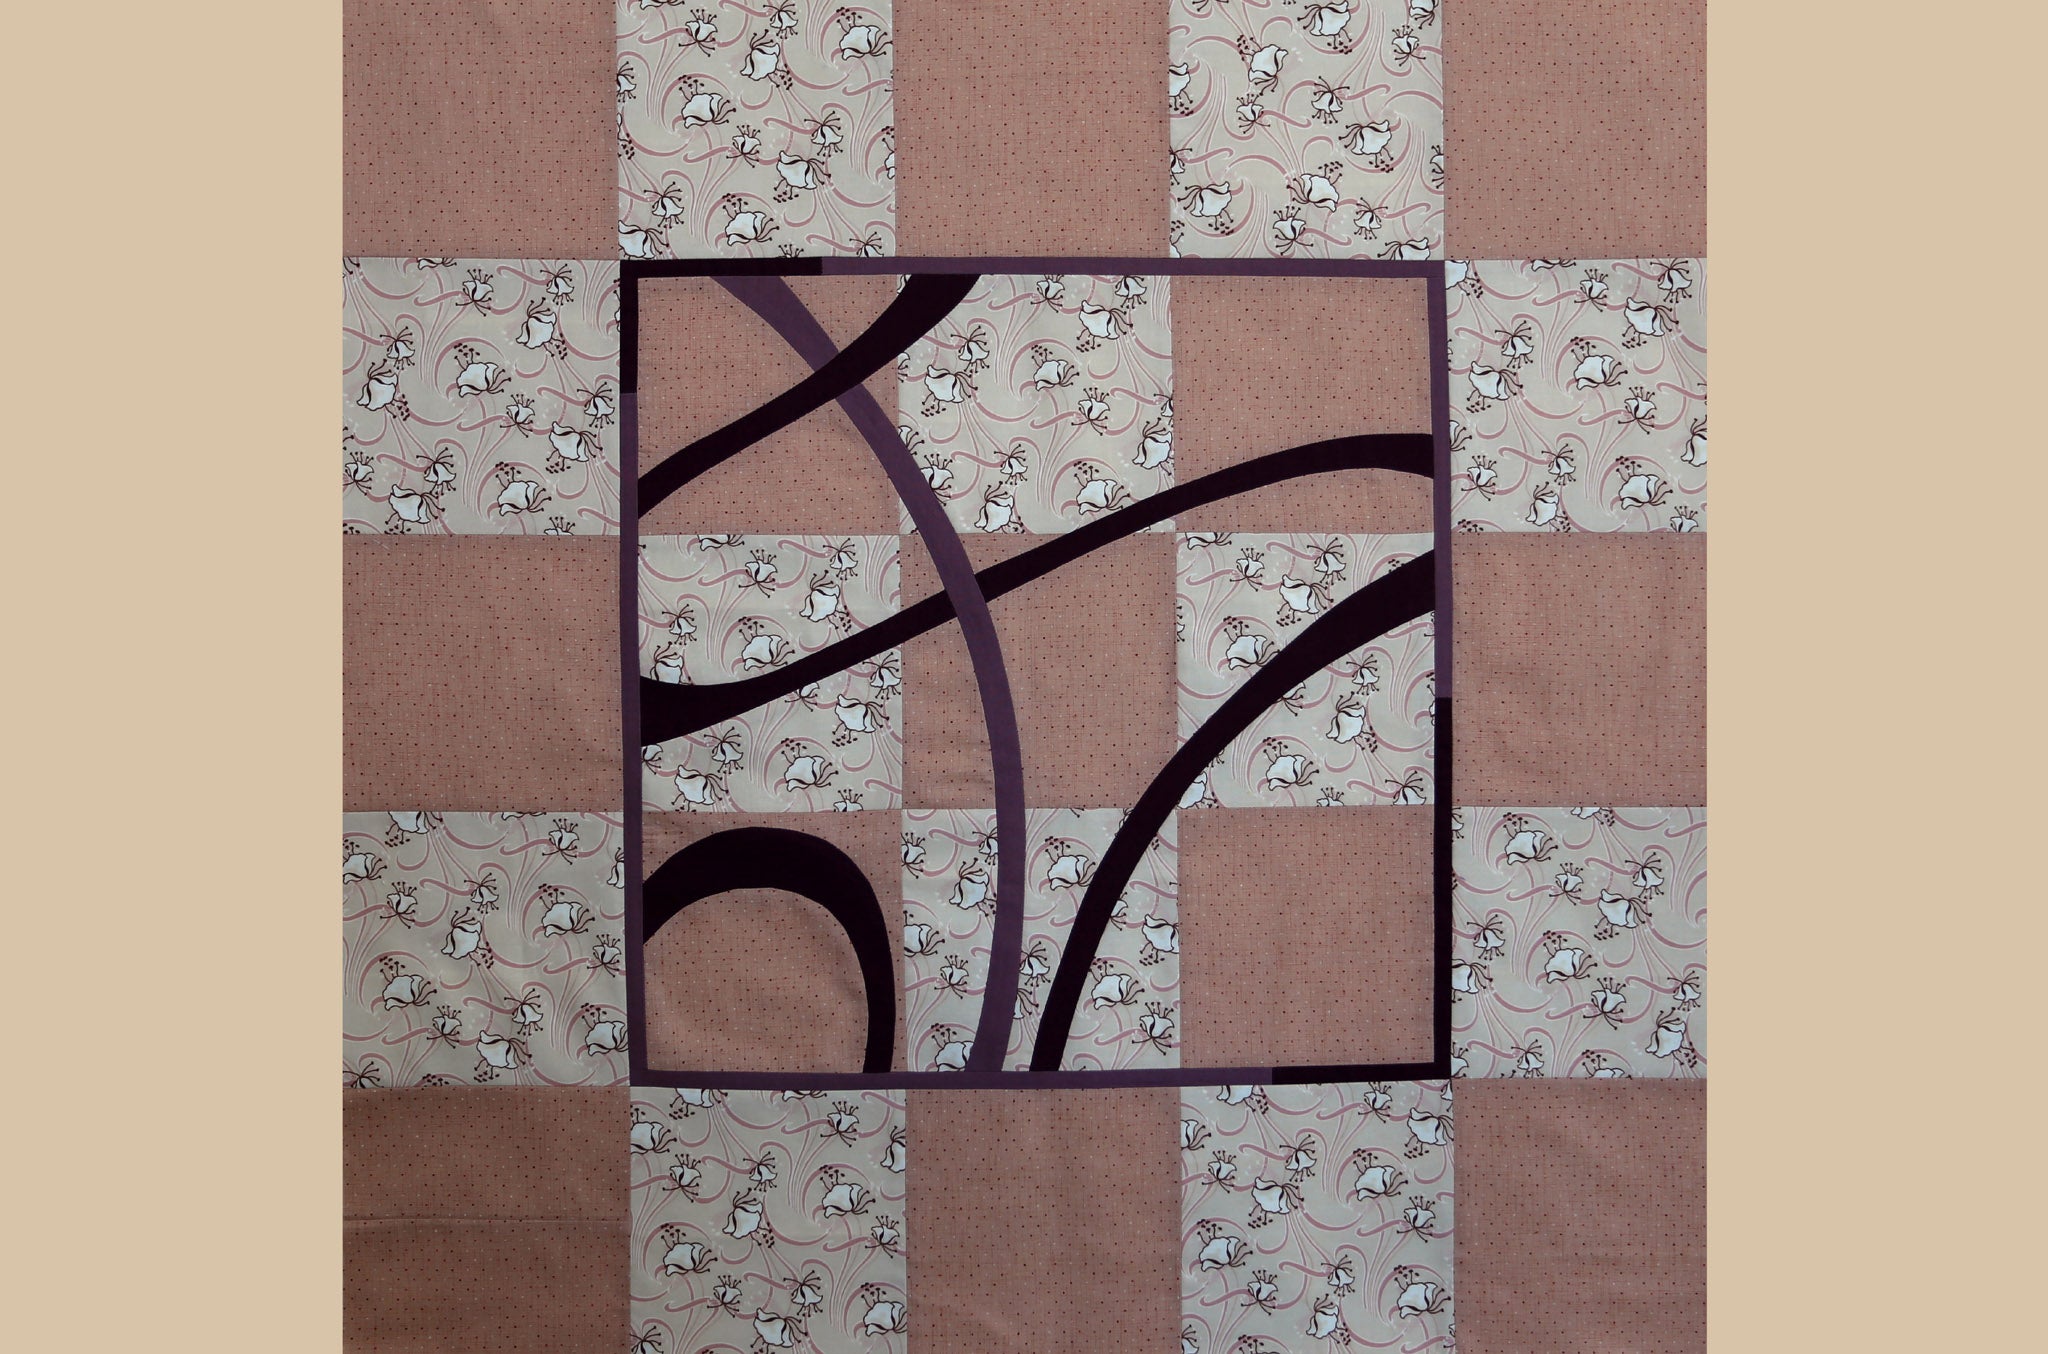 Centrum Quilt, a student project from the Creativity & Inserted Curves Workshop taught by Patricia Belyea